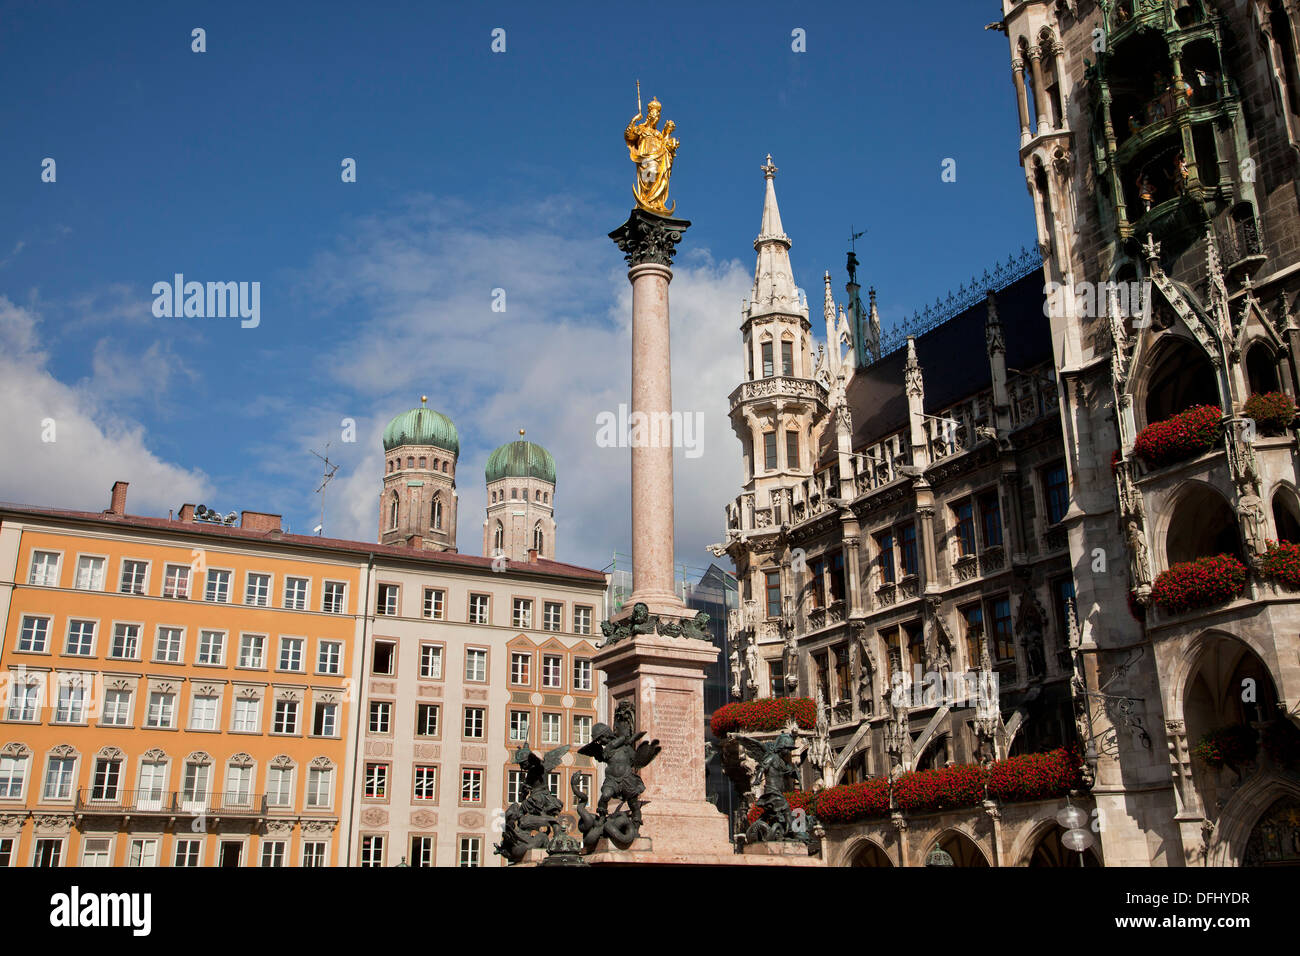 Virgin Mary atop the Mariensaeule, neues Rathaus and the church towers of the Frauenkirche in Munich, Bavaria, Germany Stock Photo